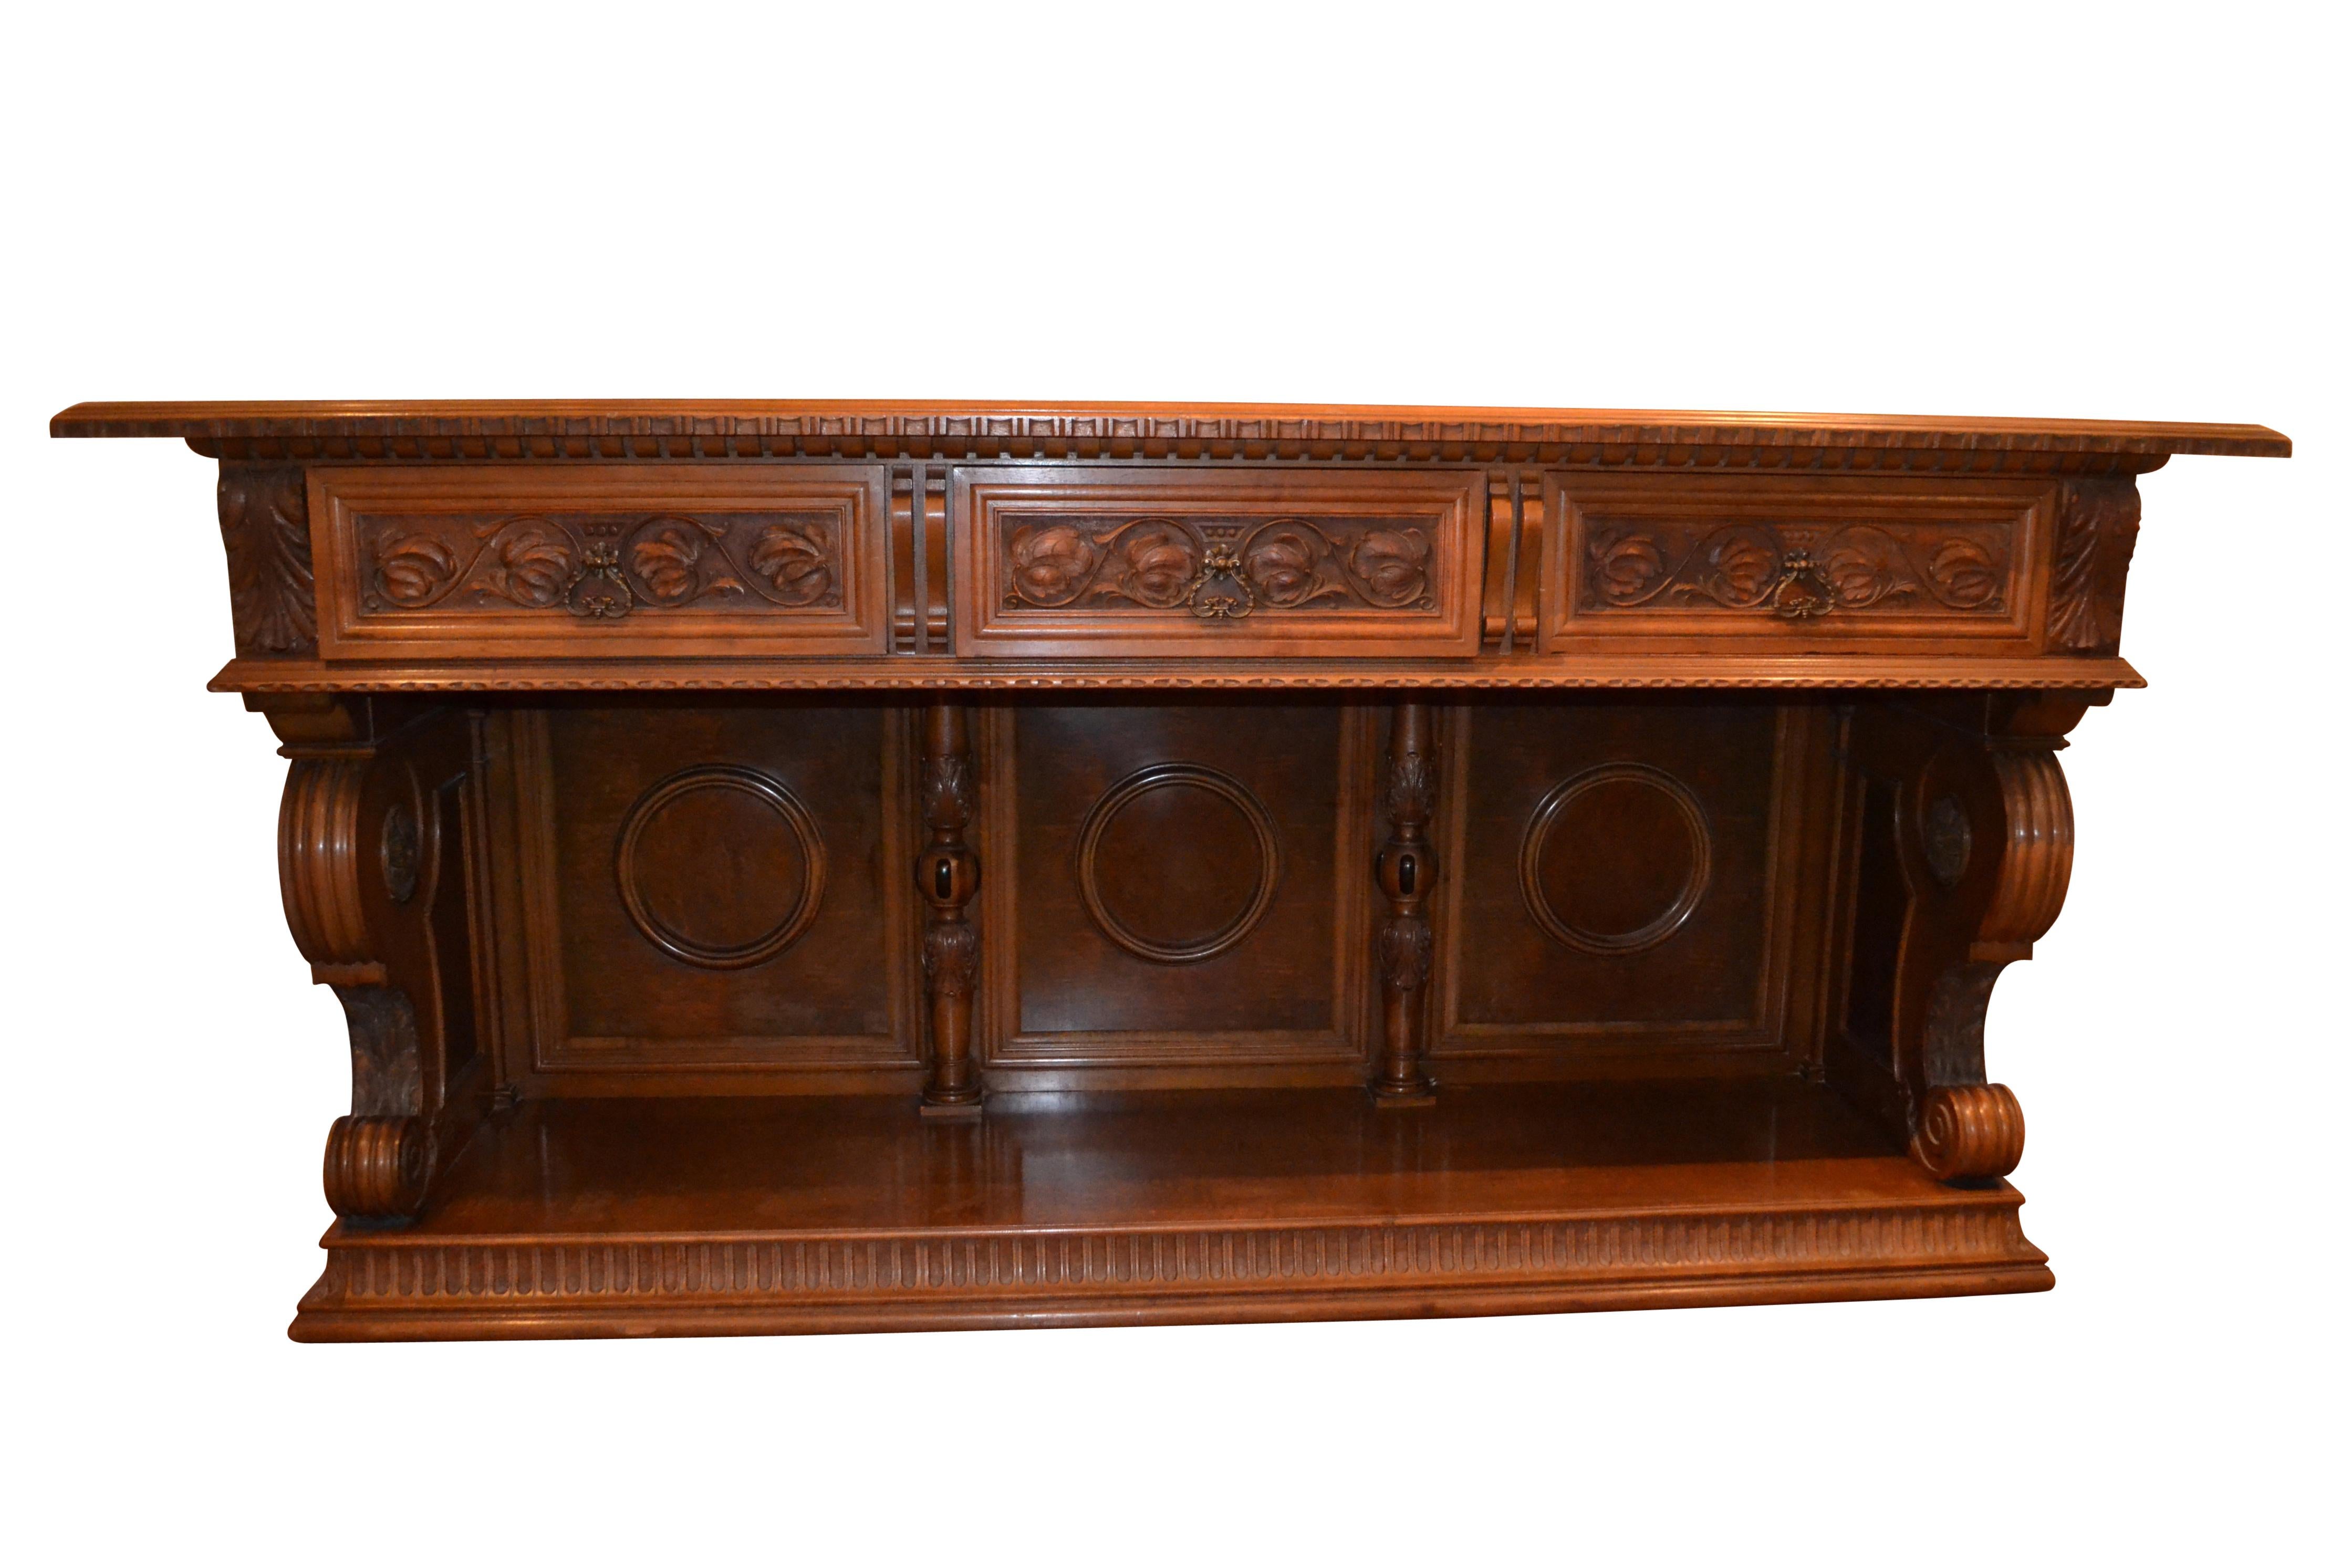 A finely carved walnut sideboard/credenza in the Renaissance Revival style, made in the United States by the Royal Furniture Company Grand Rapids Michigan at the turn of the 20 Century. There are three pull-out drawers one with  a bronze Royal